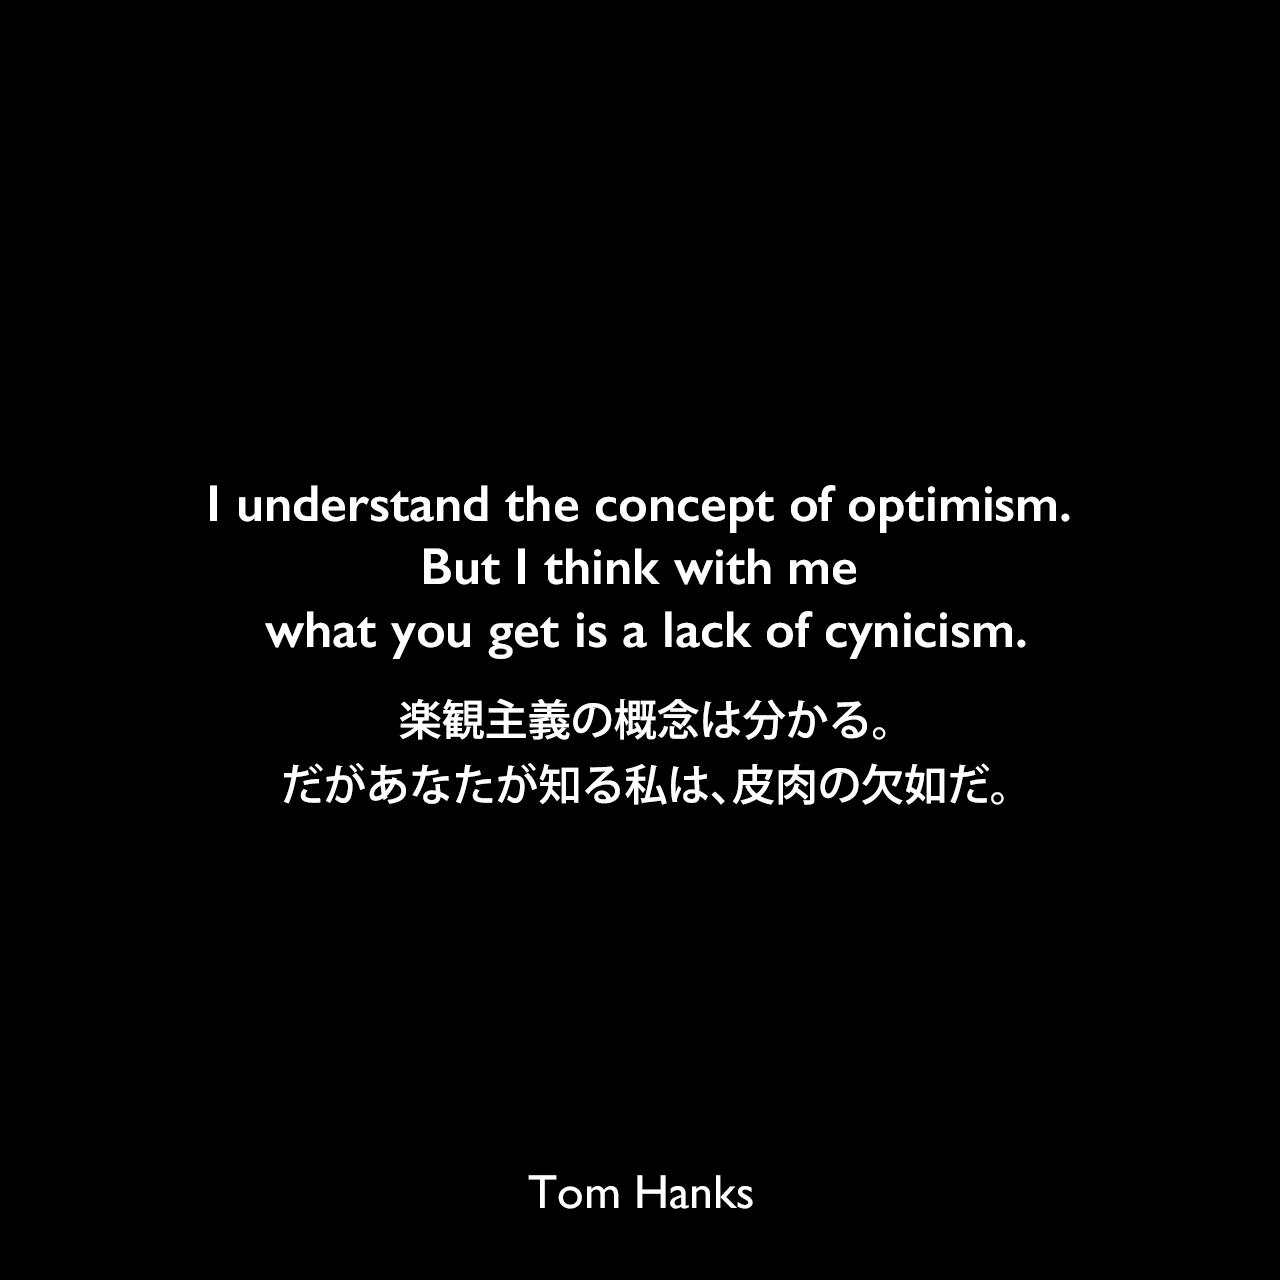 I understand the concept of optimism. But I think with me what you get is a lack of cynicism.楽観主義の概念は分かる。だがあなたが知る私は、皮肉の欠如だ。Tom Hanks